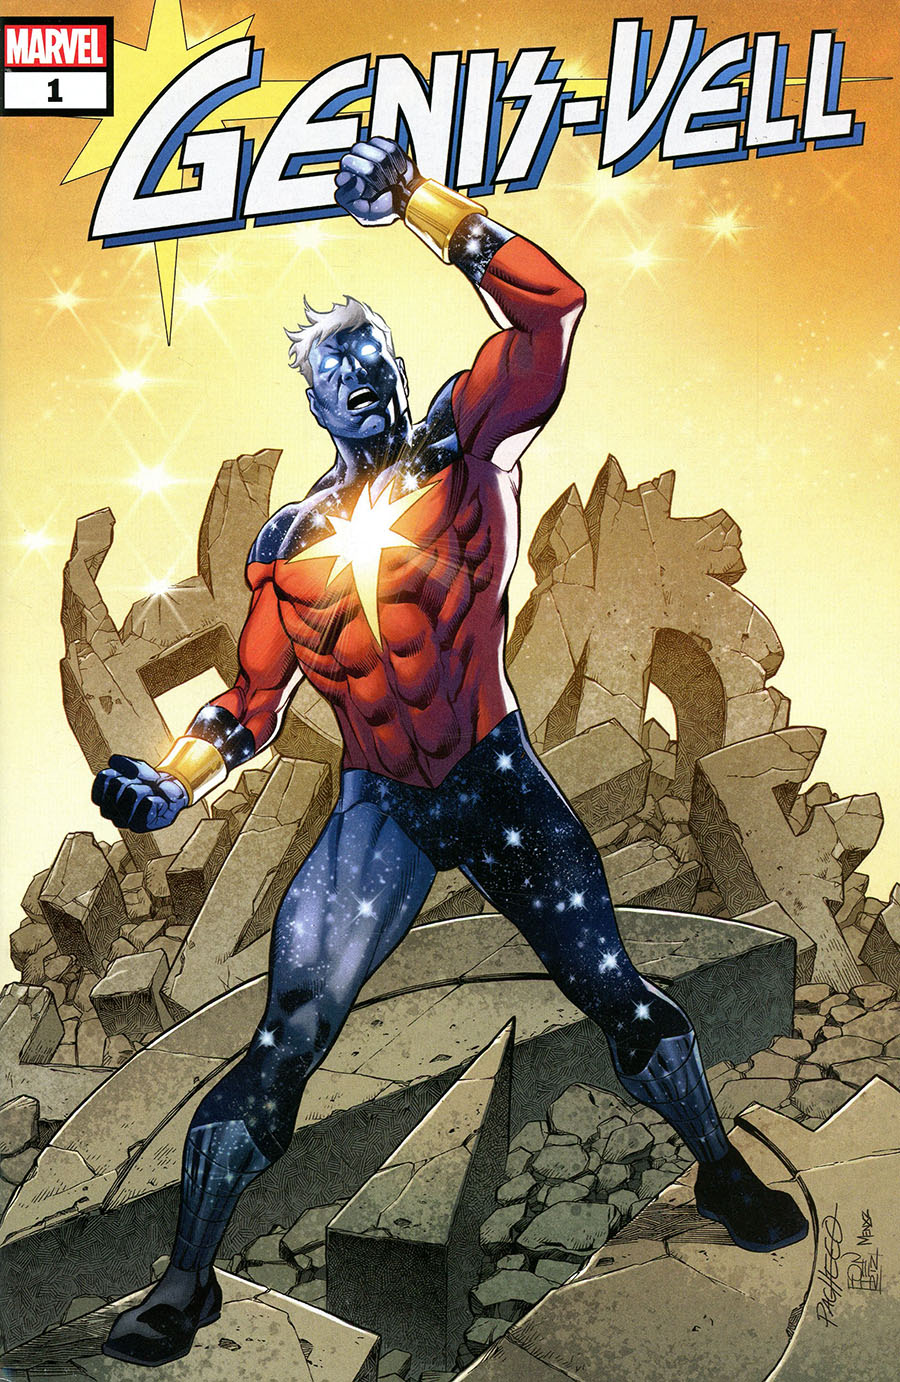 Genis-Vell Marvel Tales #1 (One Shot) Cover A Regular Carlos Pacheco Cover